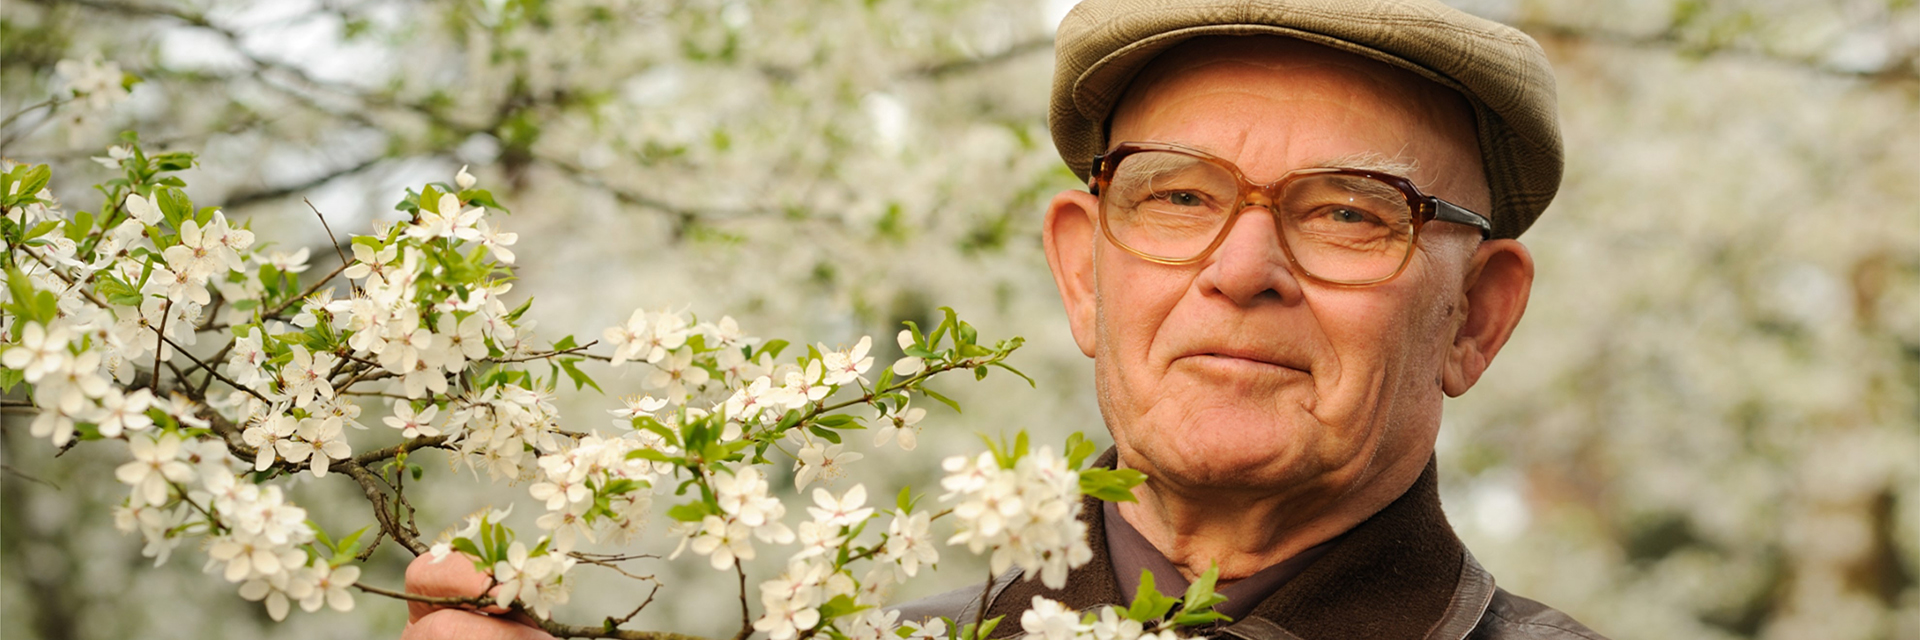 man in golfing hat holding a branch of cherry blossoms